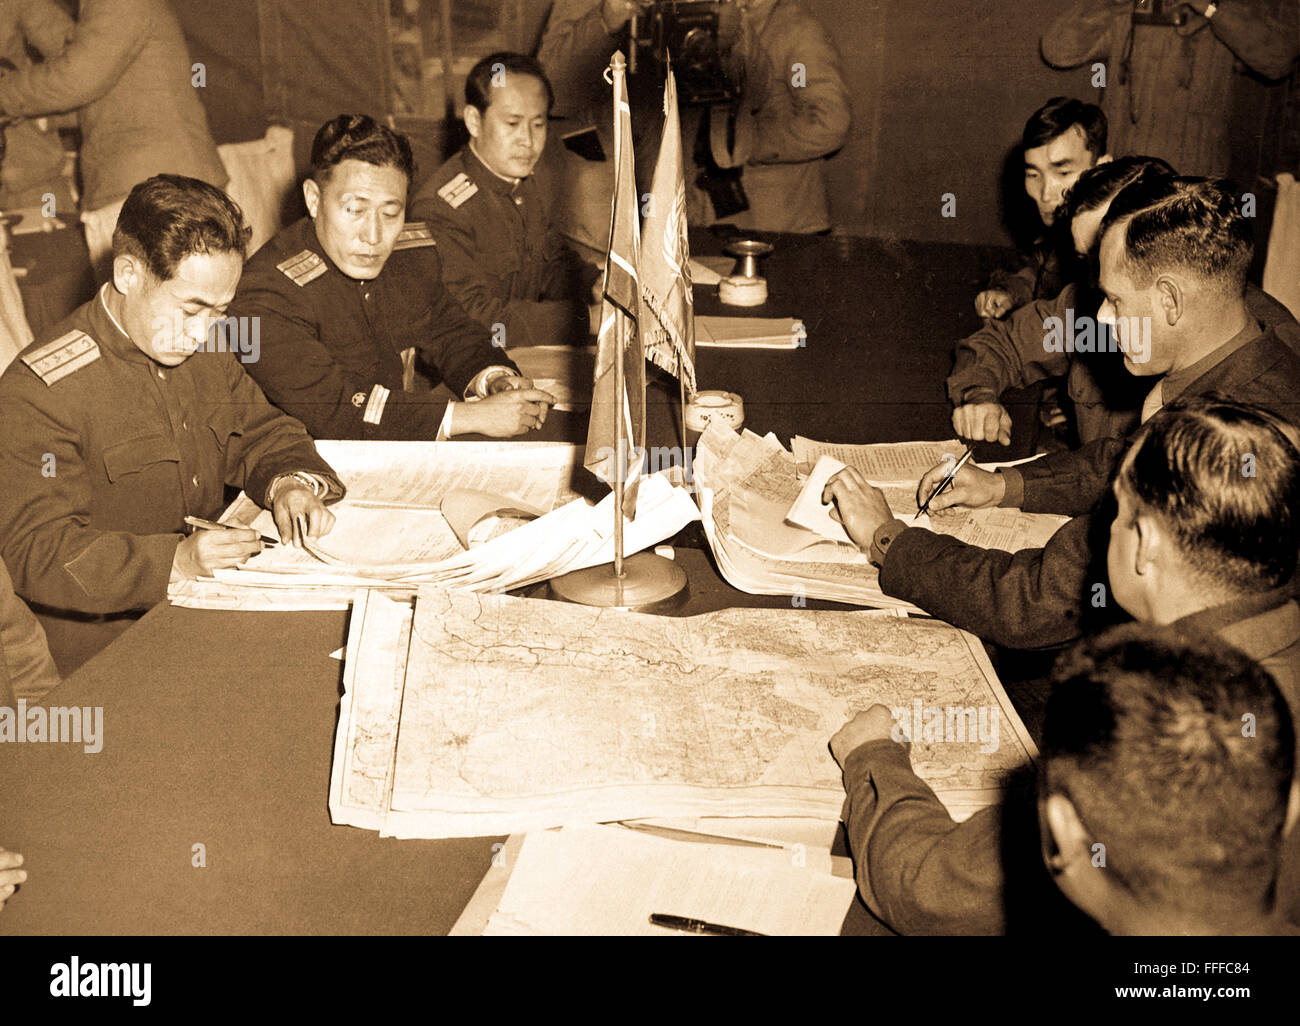 Col. James Murray, Jr., USMC, and Col. Chang Chun San, of the North Korean Communist Army, initial maps showing the north and south boundaries of the demarcation zone, during the Panmunjom cease fire talks.  October 11, 1951. Photo by F. Kazukaitis. (Navy) Stock Photo